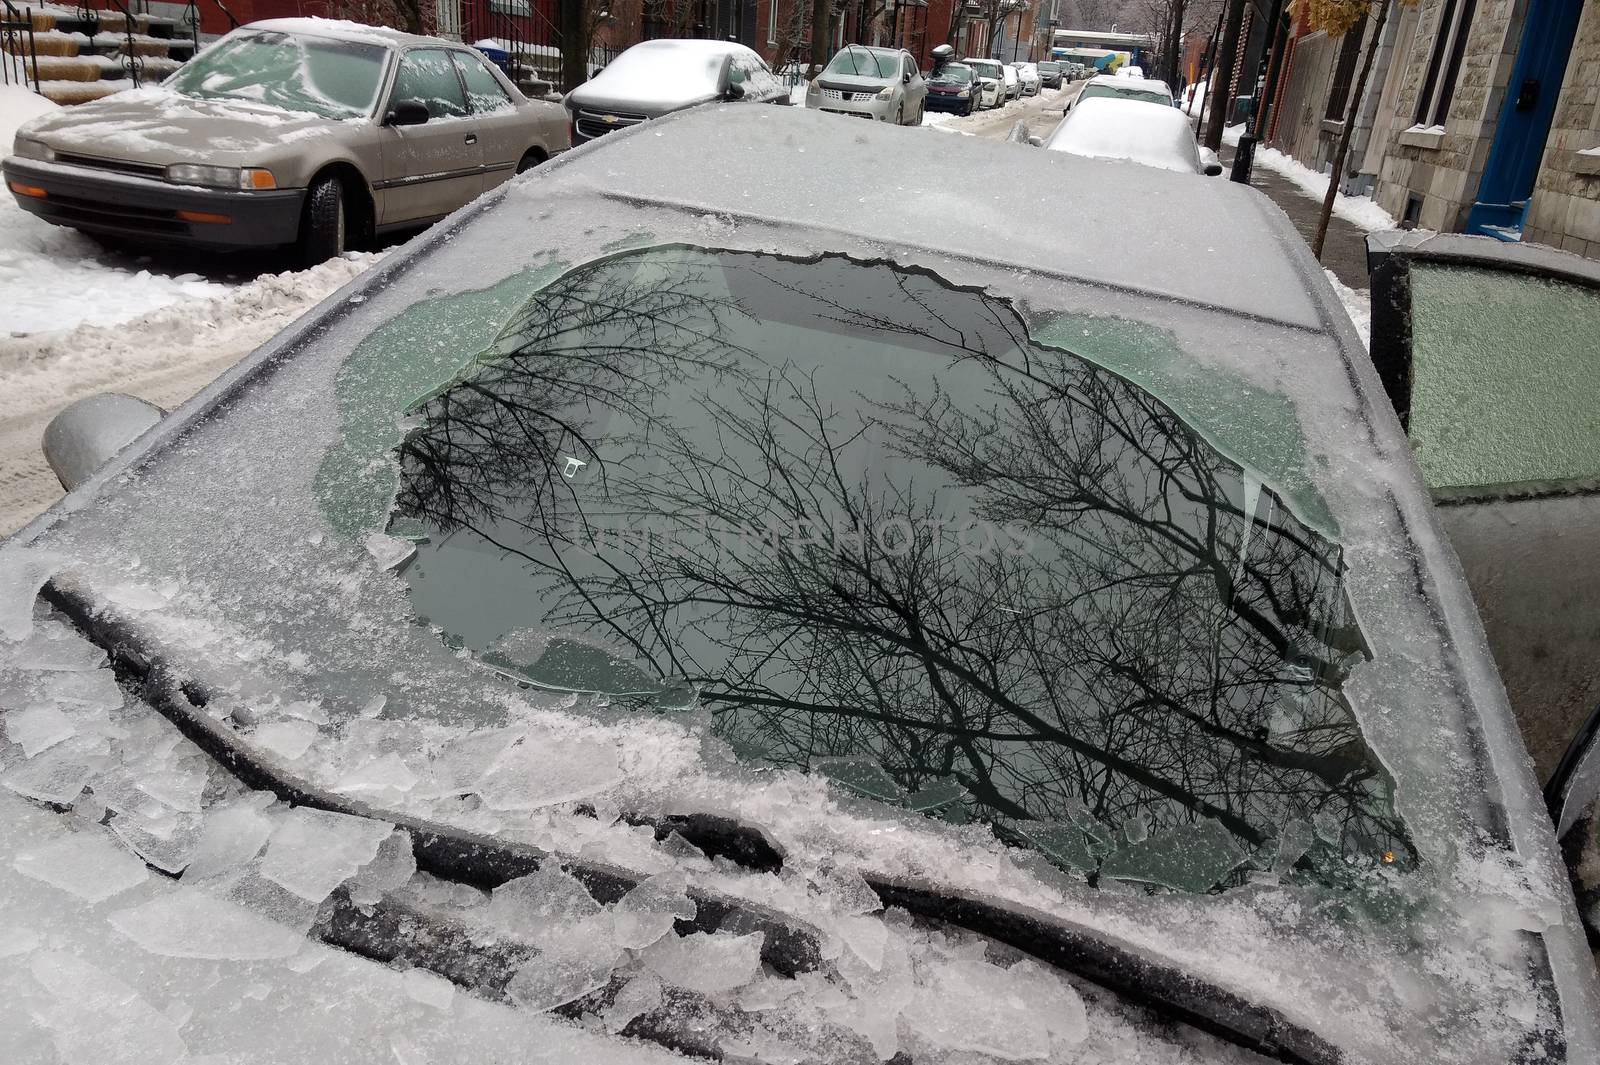 Thick layer of ice covering car after freezing rain in Montreal, by mbruxelle